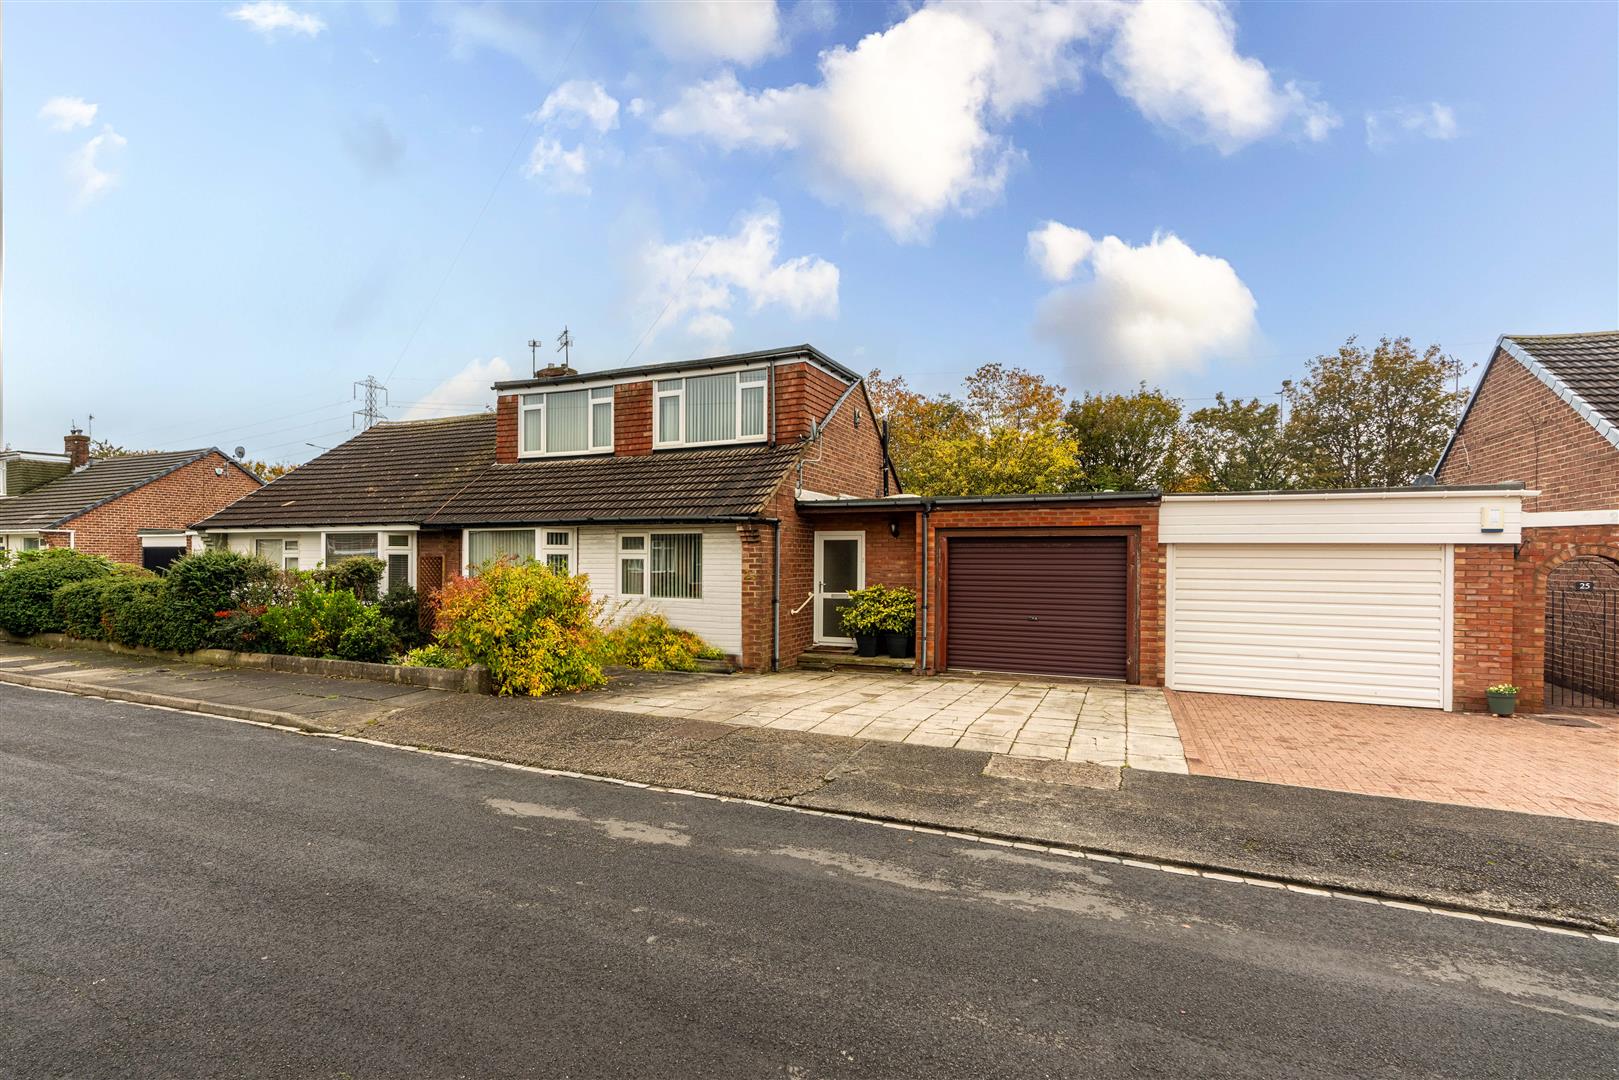 3 bed semi-detached bungalow for sale in Blanchland Avenue, Wideopen, NE13